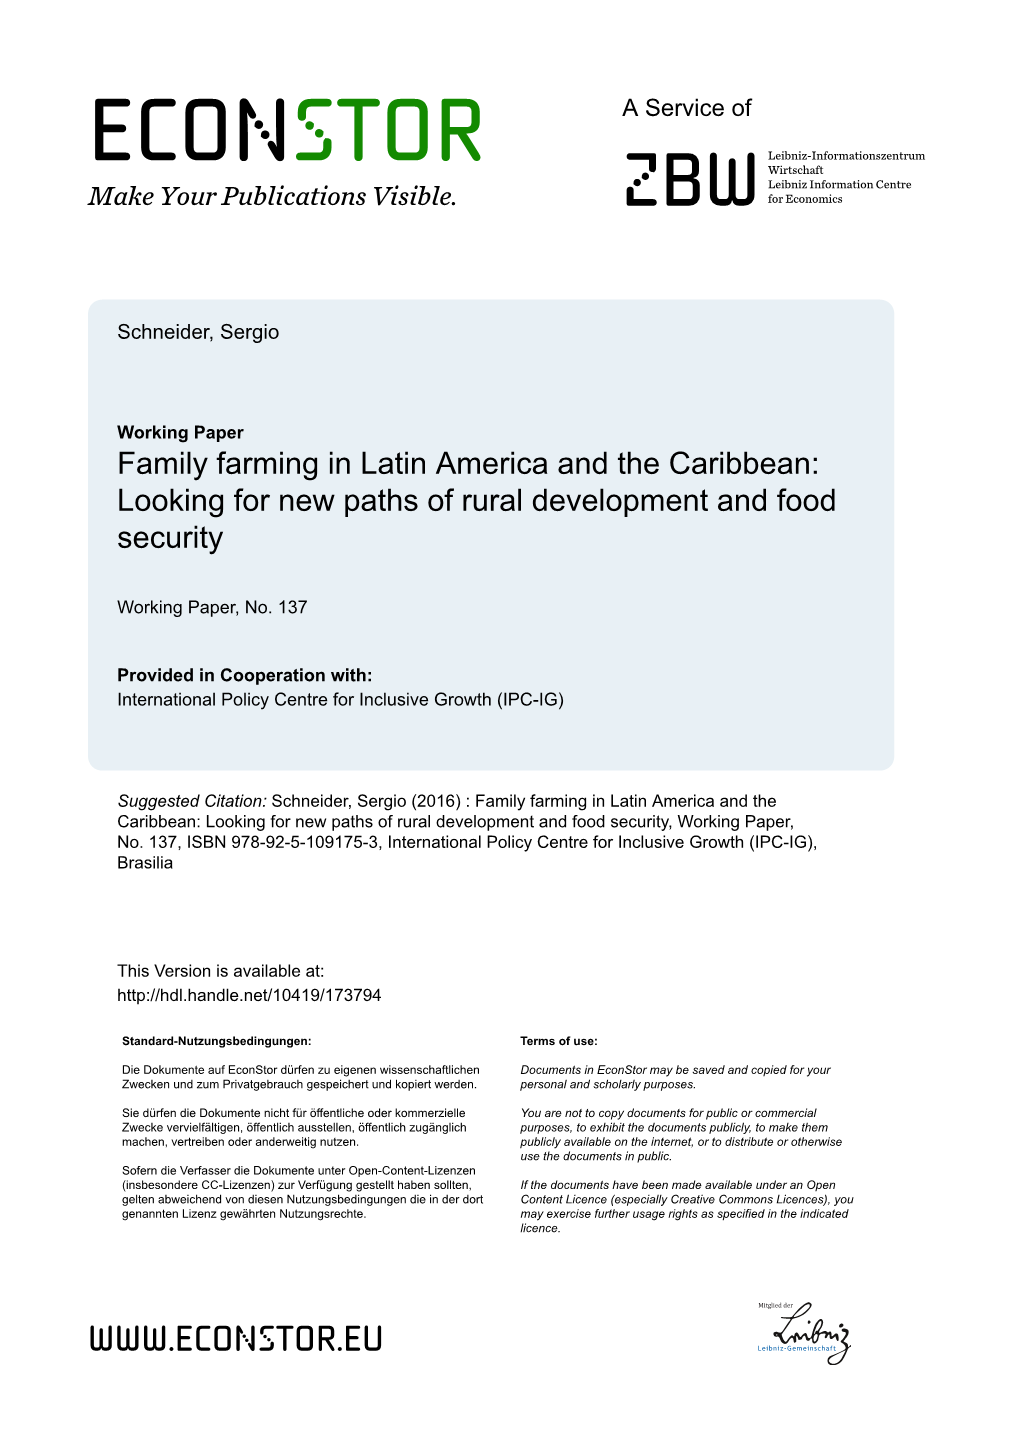 Family Farming in Latin America and the Caribbean: Looking for New Paths of Rural Development and Food Security